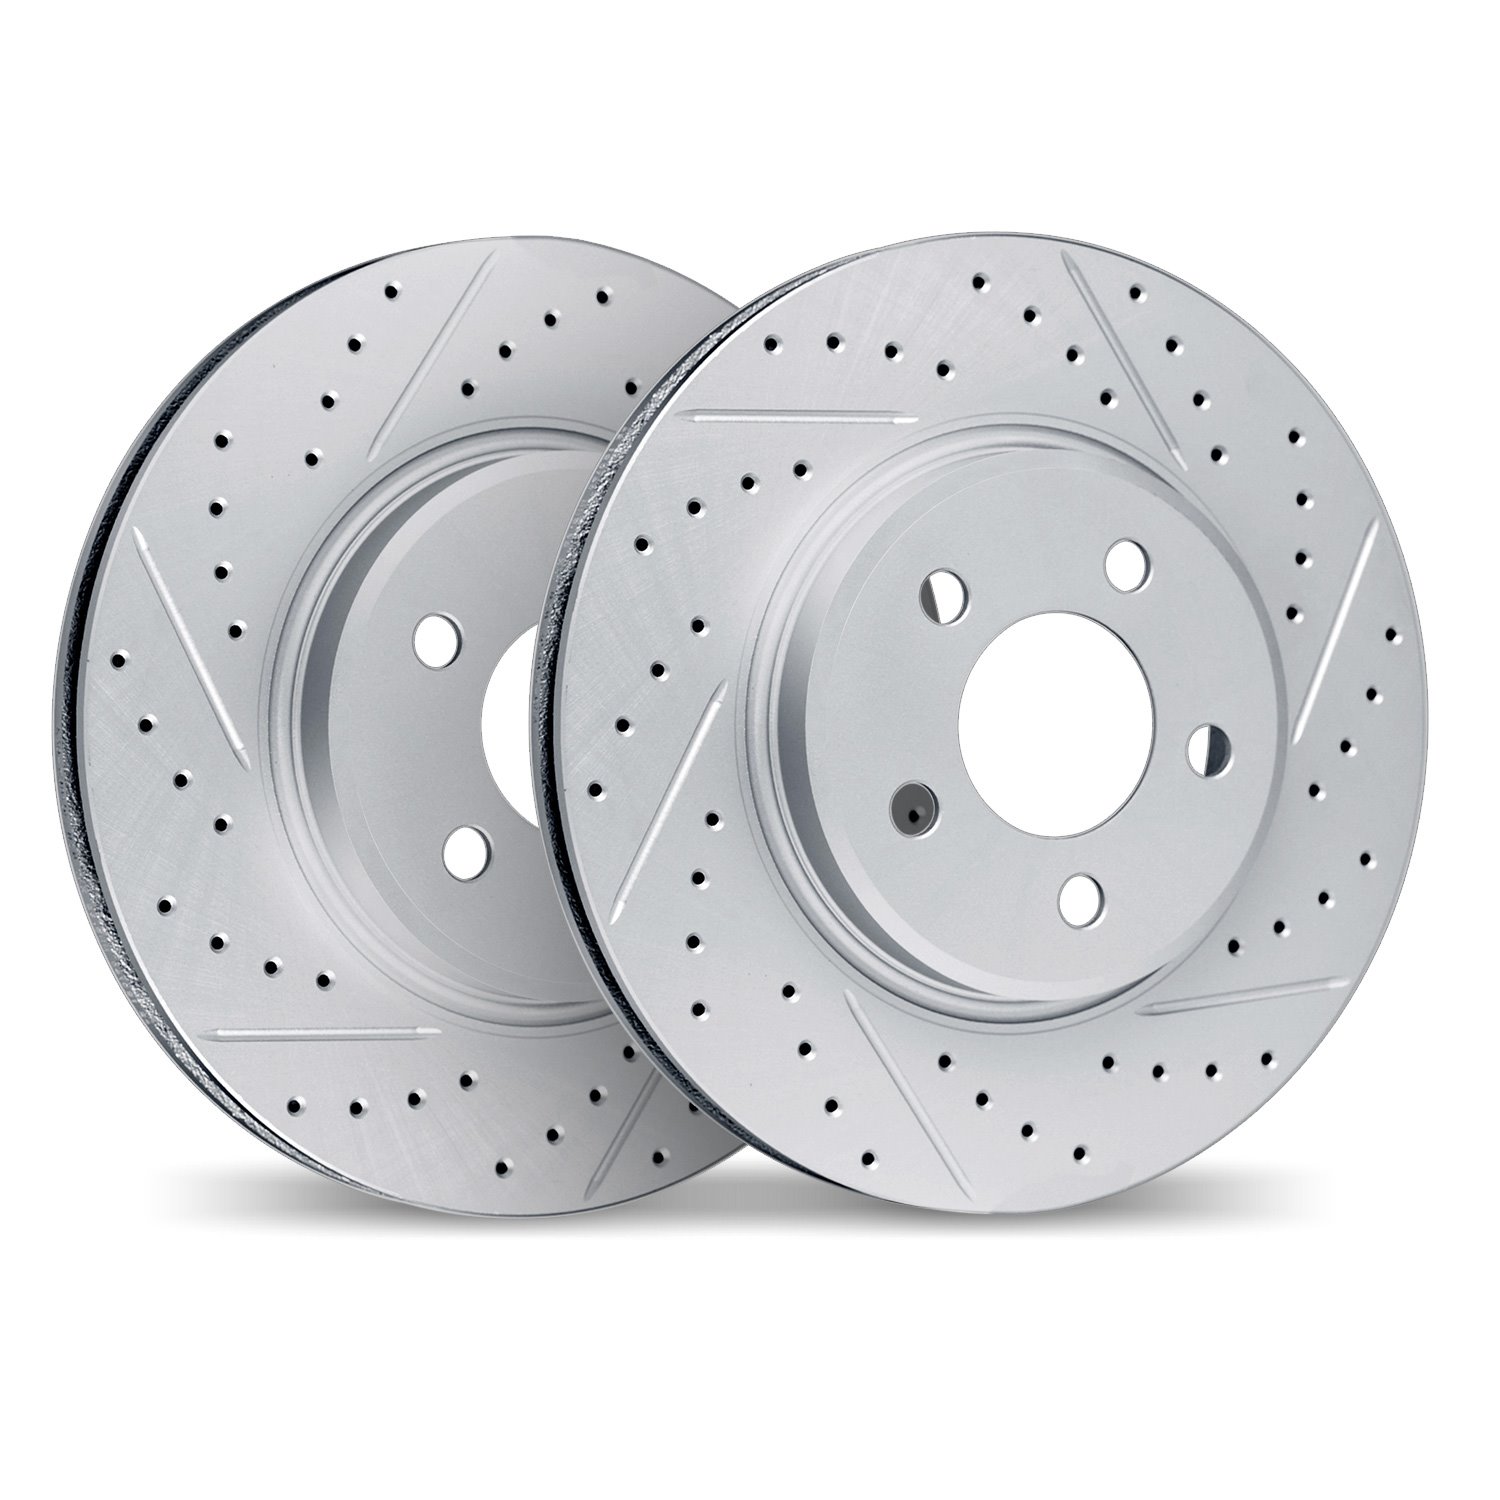 2002-54049 Geoperformance Drilled/Slotted Brake Rotors, Fits Select Ford/Lincoln/Mercury/Mazda, Position: Front